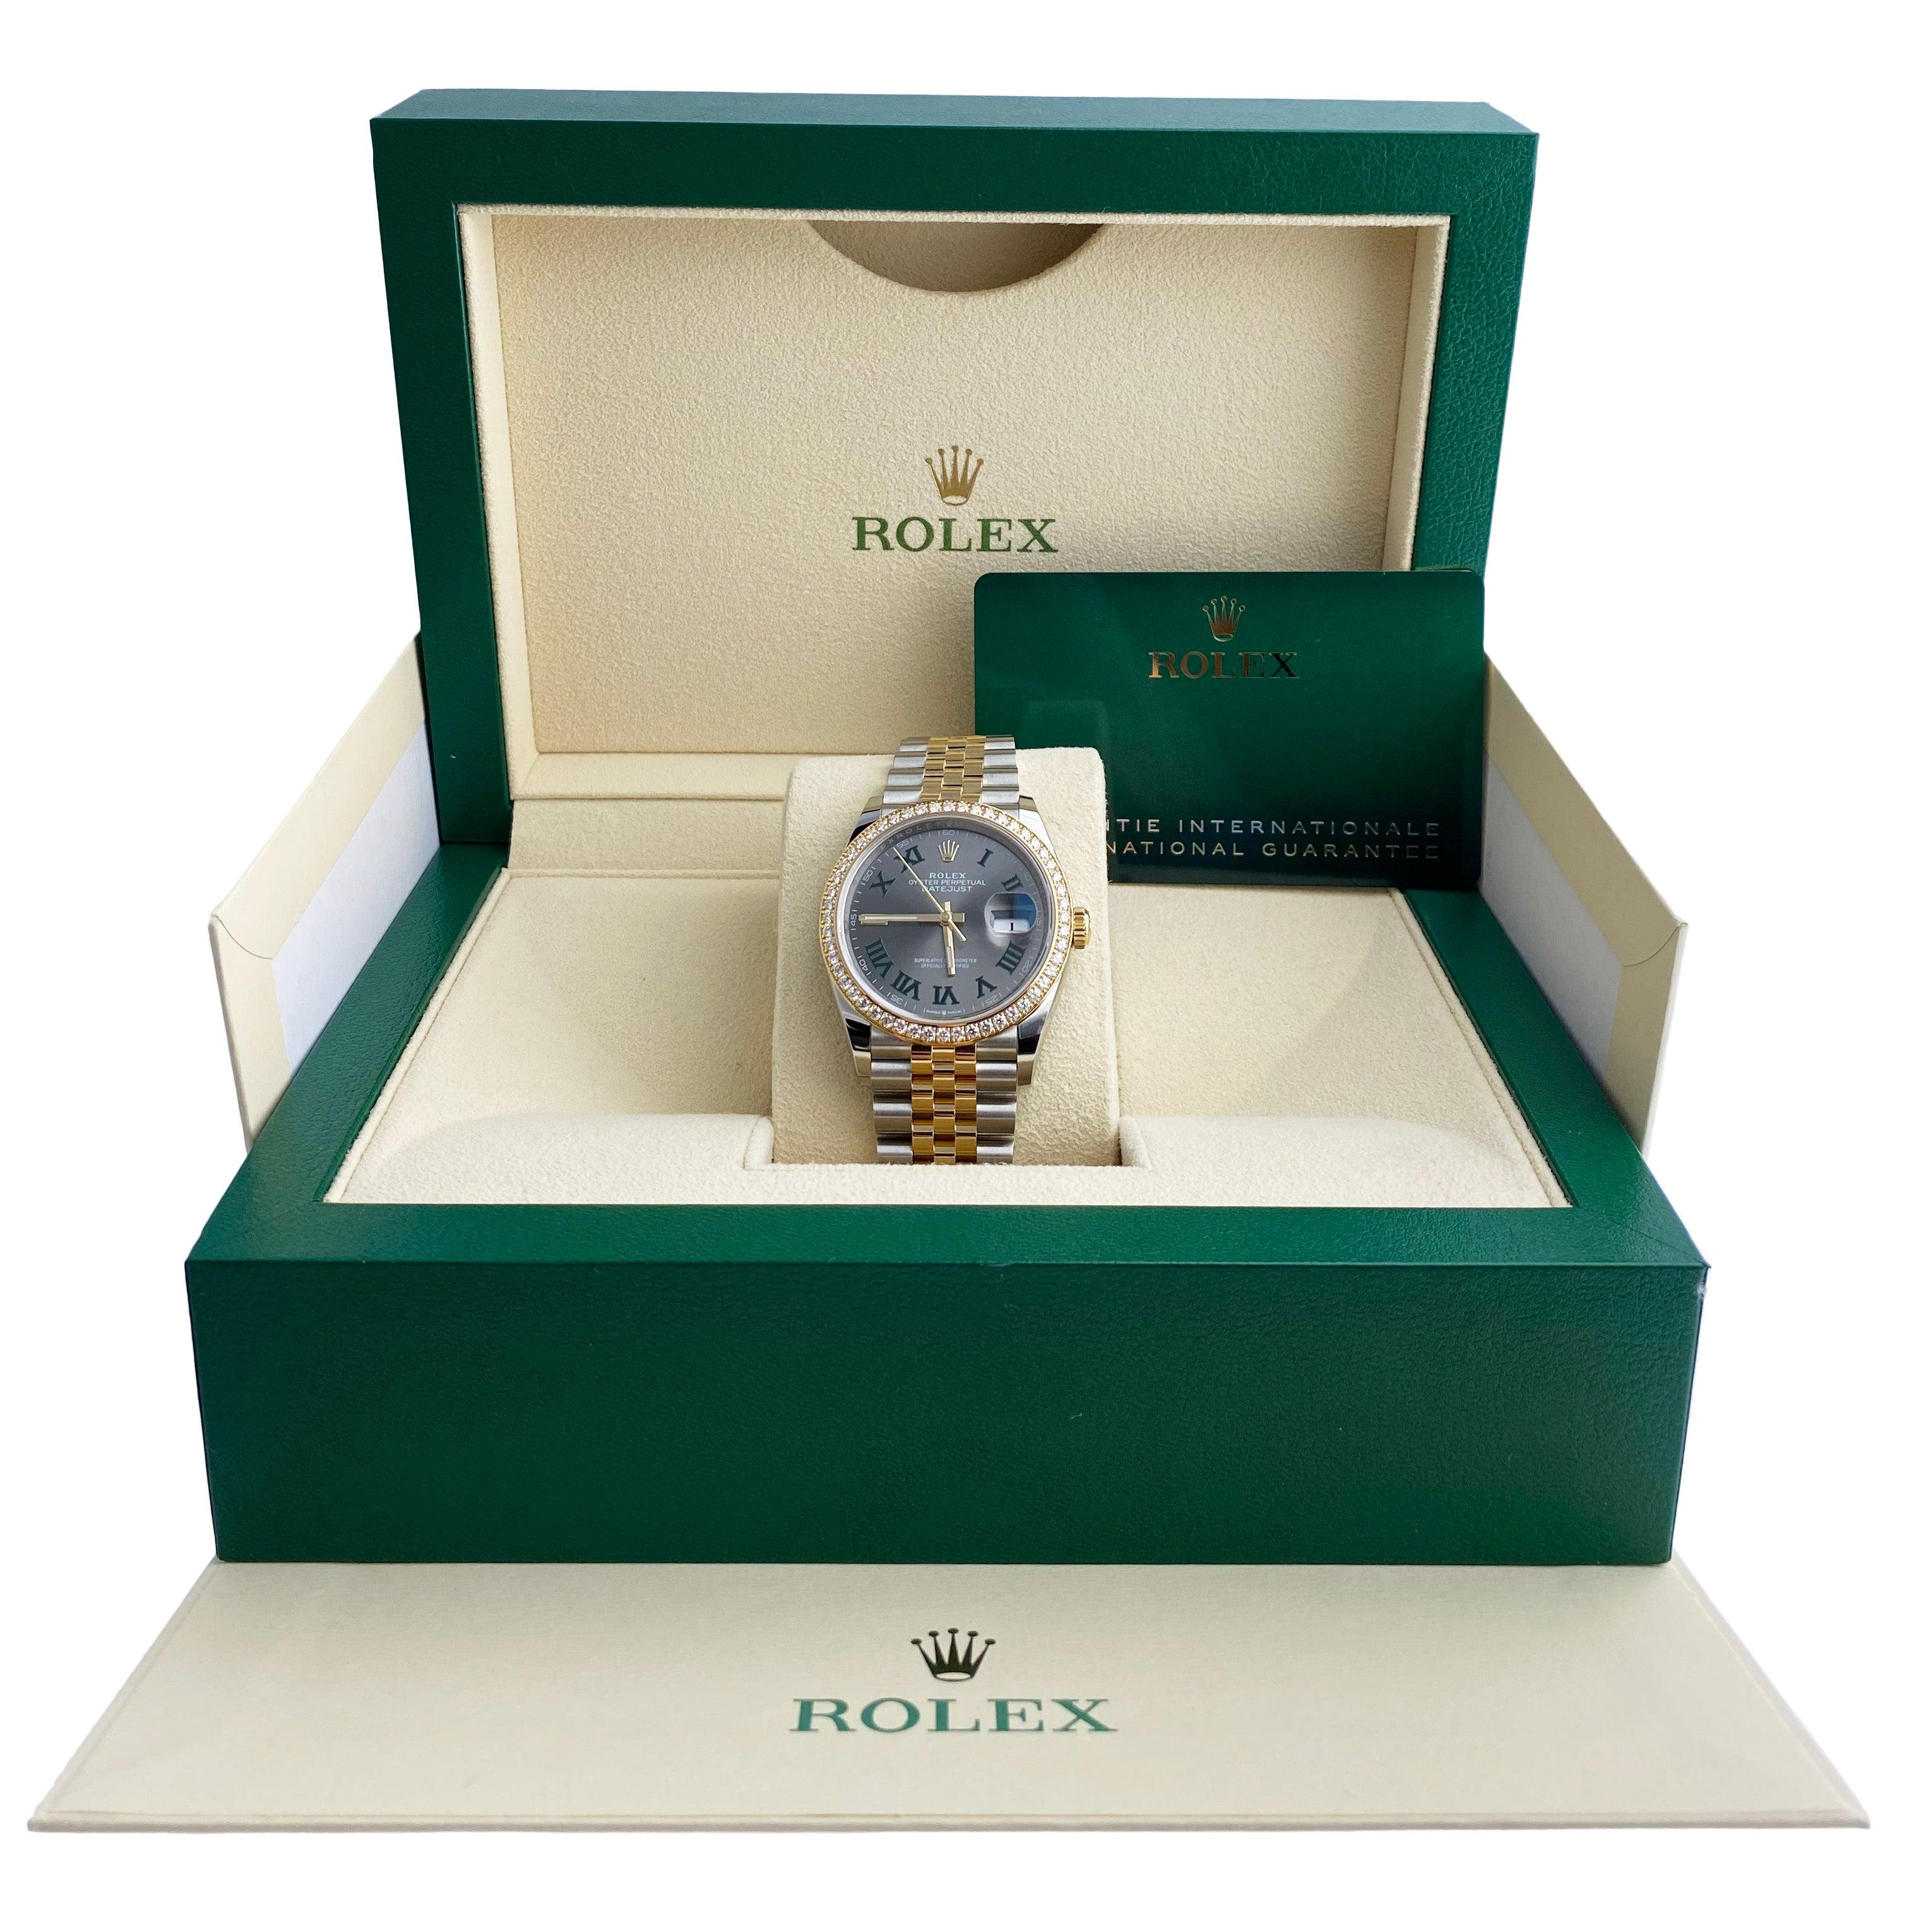 
Rolex Datejust Wimbledon 126283RBR Mens Watch. 36mm stainless steel case. 18K yellow gold bezel with original factory diamond set. Silver-grey dial with yellow gold luminous hands. Roman numerals and luminous index hour marker. Date display at a 3